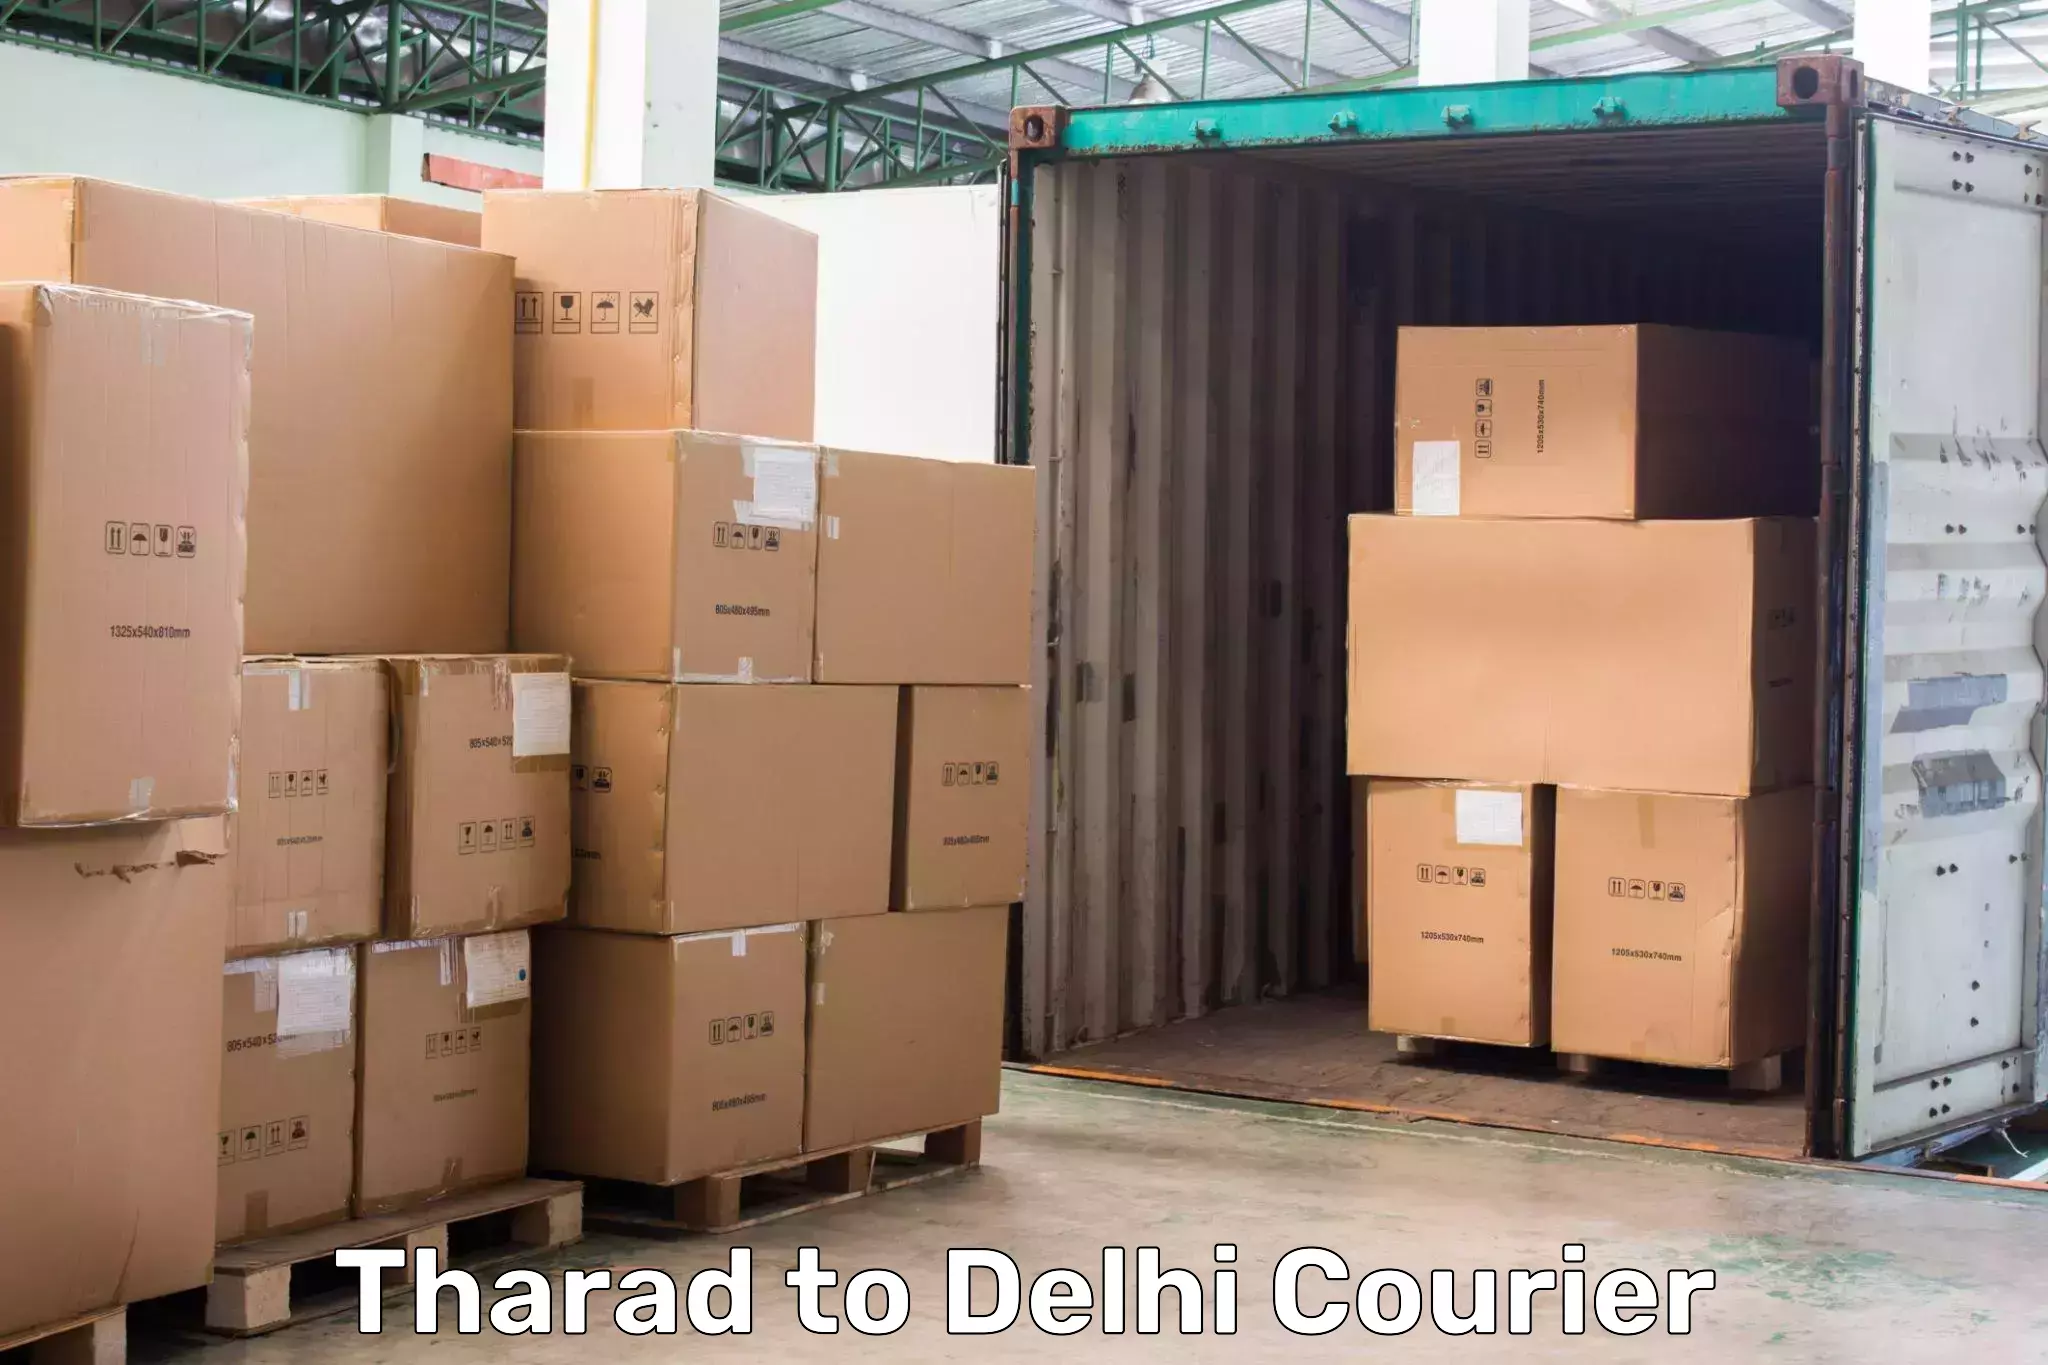 Courier service innovation Tharad to Delhi